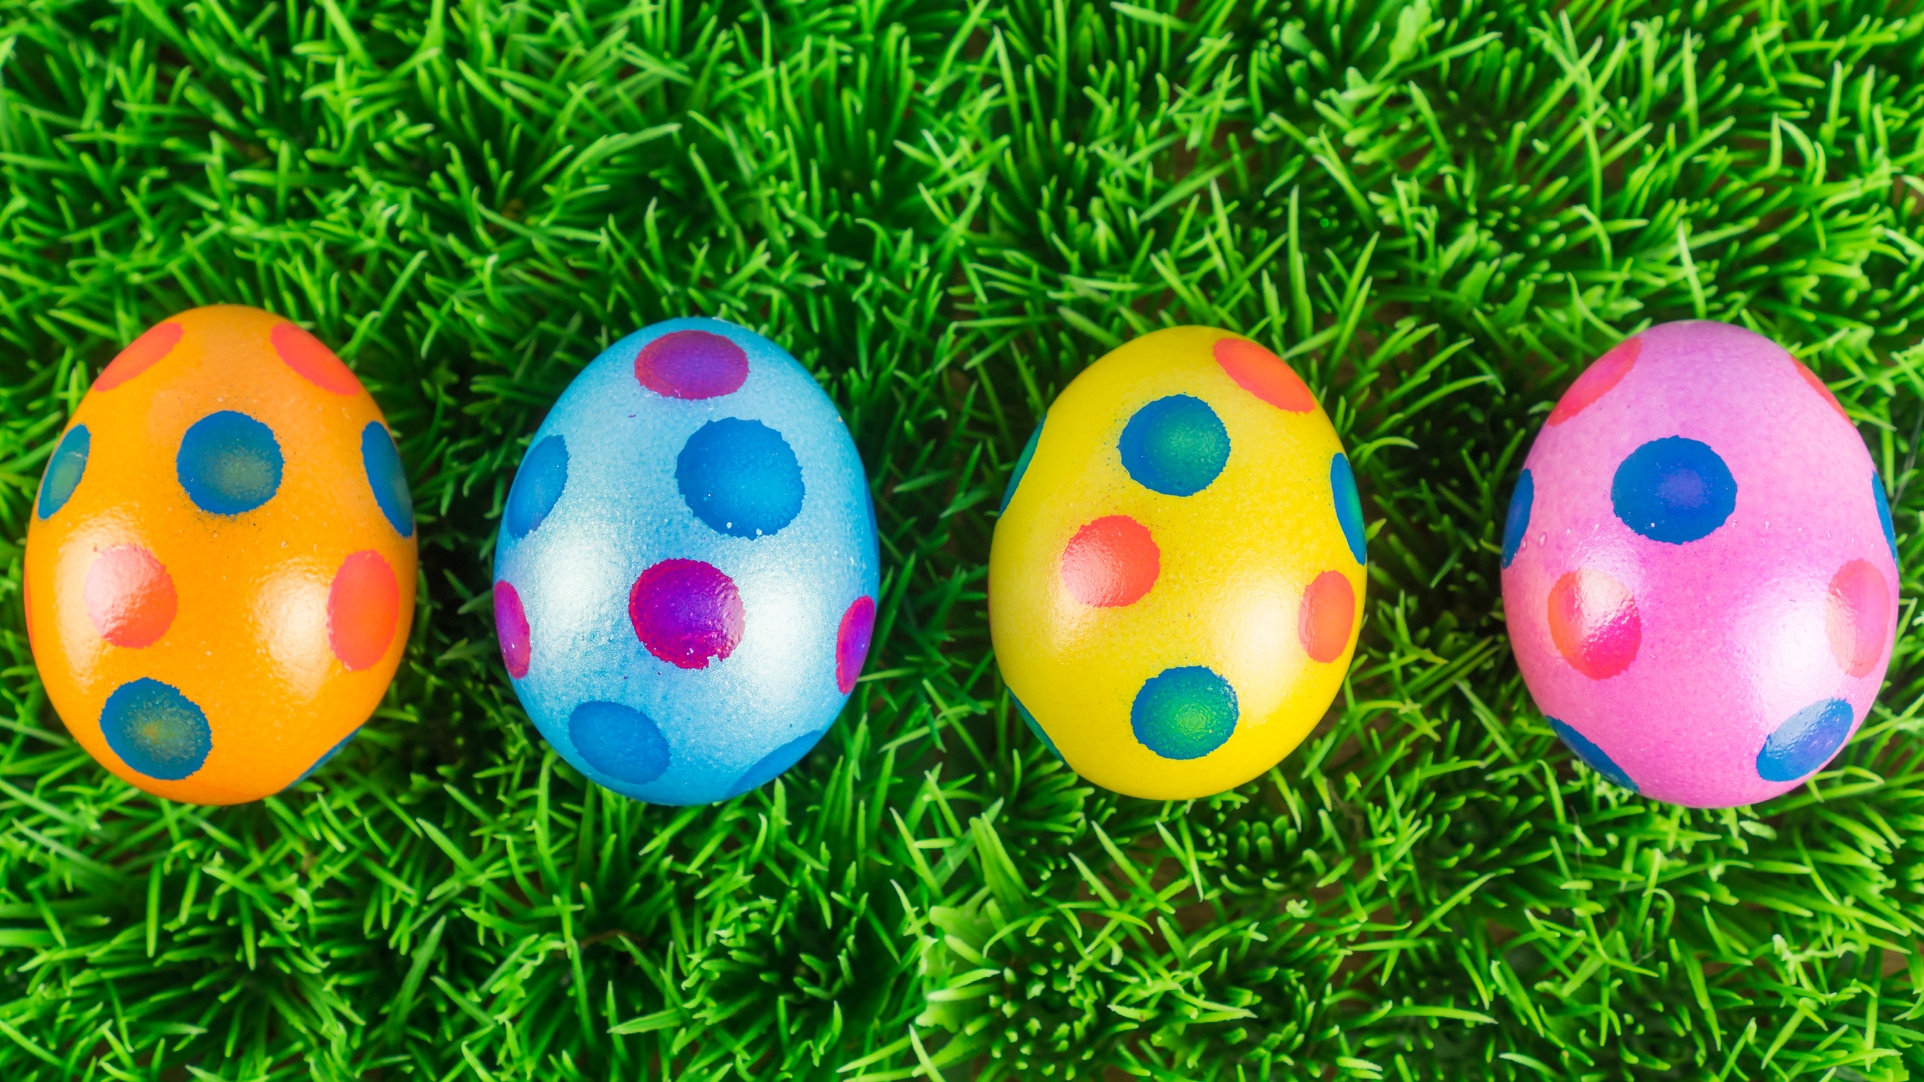 Why Easter Eggs? Inside the Origins and History of the Tradition